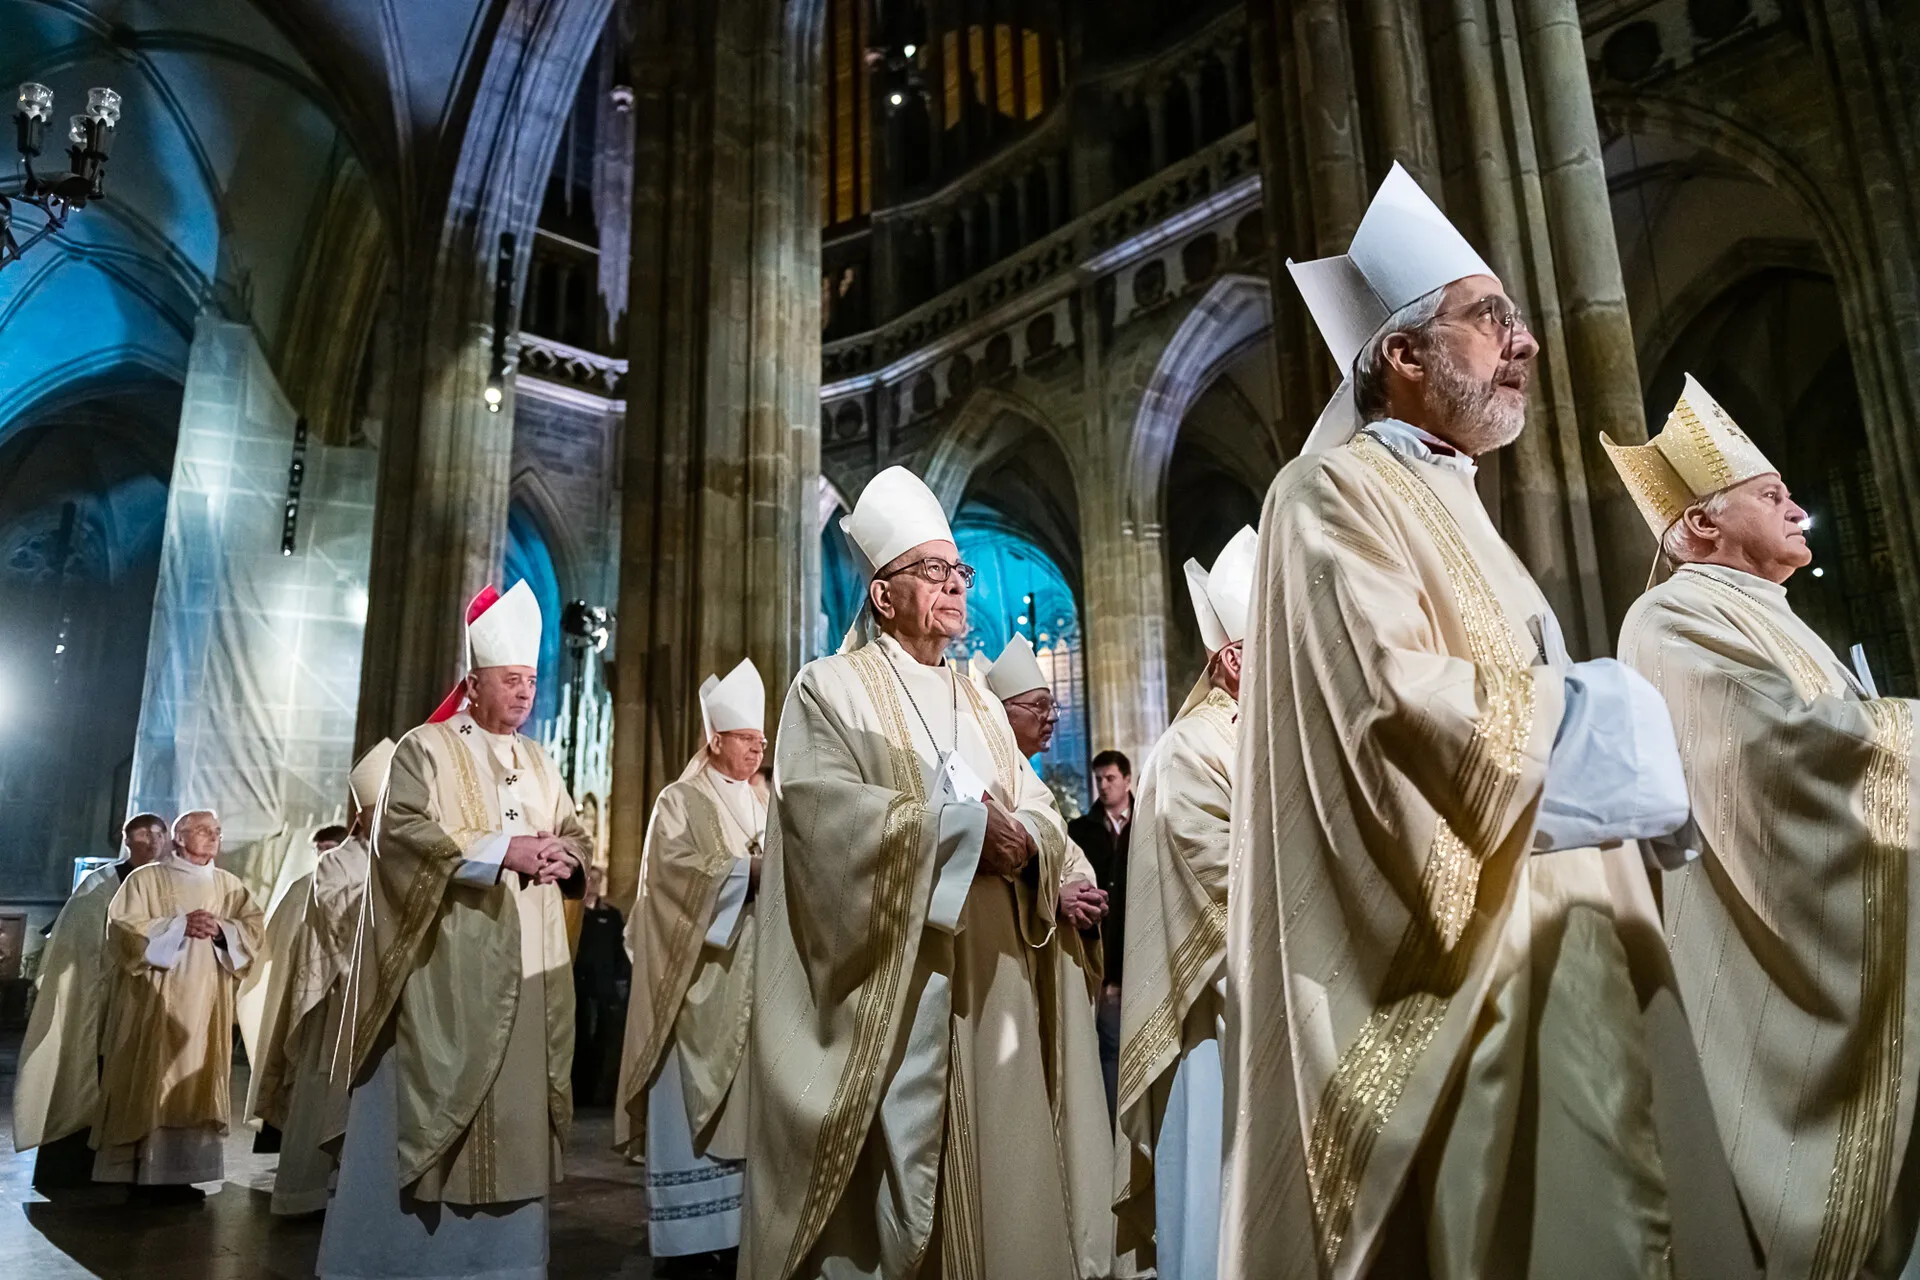 Four cardinals, 45 bishops, and 80 priests concelebrated Mass Feb. 8, 2023, under the high vaulted ceiling of Prague’s St. Vitus Cathedral with about 500 people in attendance. The Mass marked the midway point of the European Continental Assembly meeting in Prague Feb. 5-12, 2023.?w=200&h=150